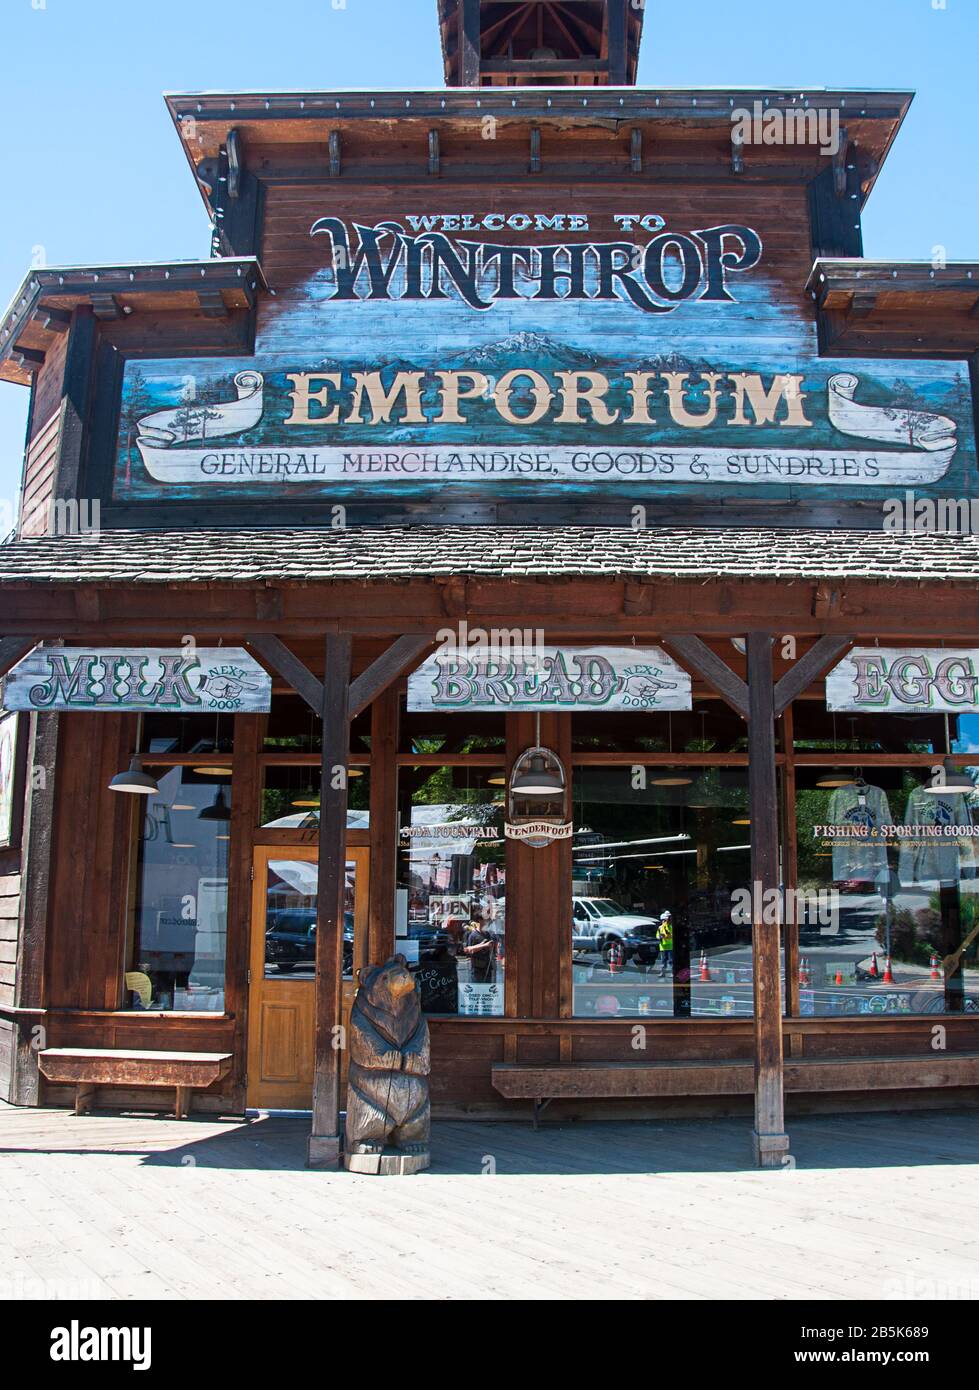 Winthrop, WA USA June 25, 2017:  This Winthrop Emporium store is an iconic shop in this beautiful wild west town, very popular travel destination. Stock Photo